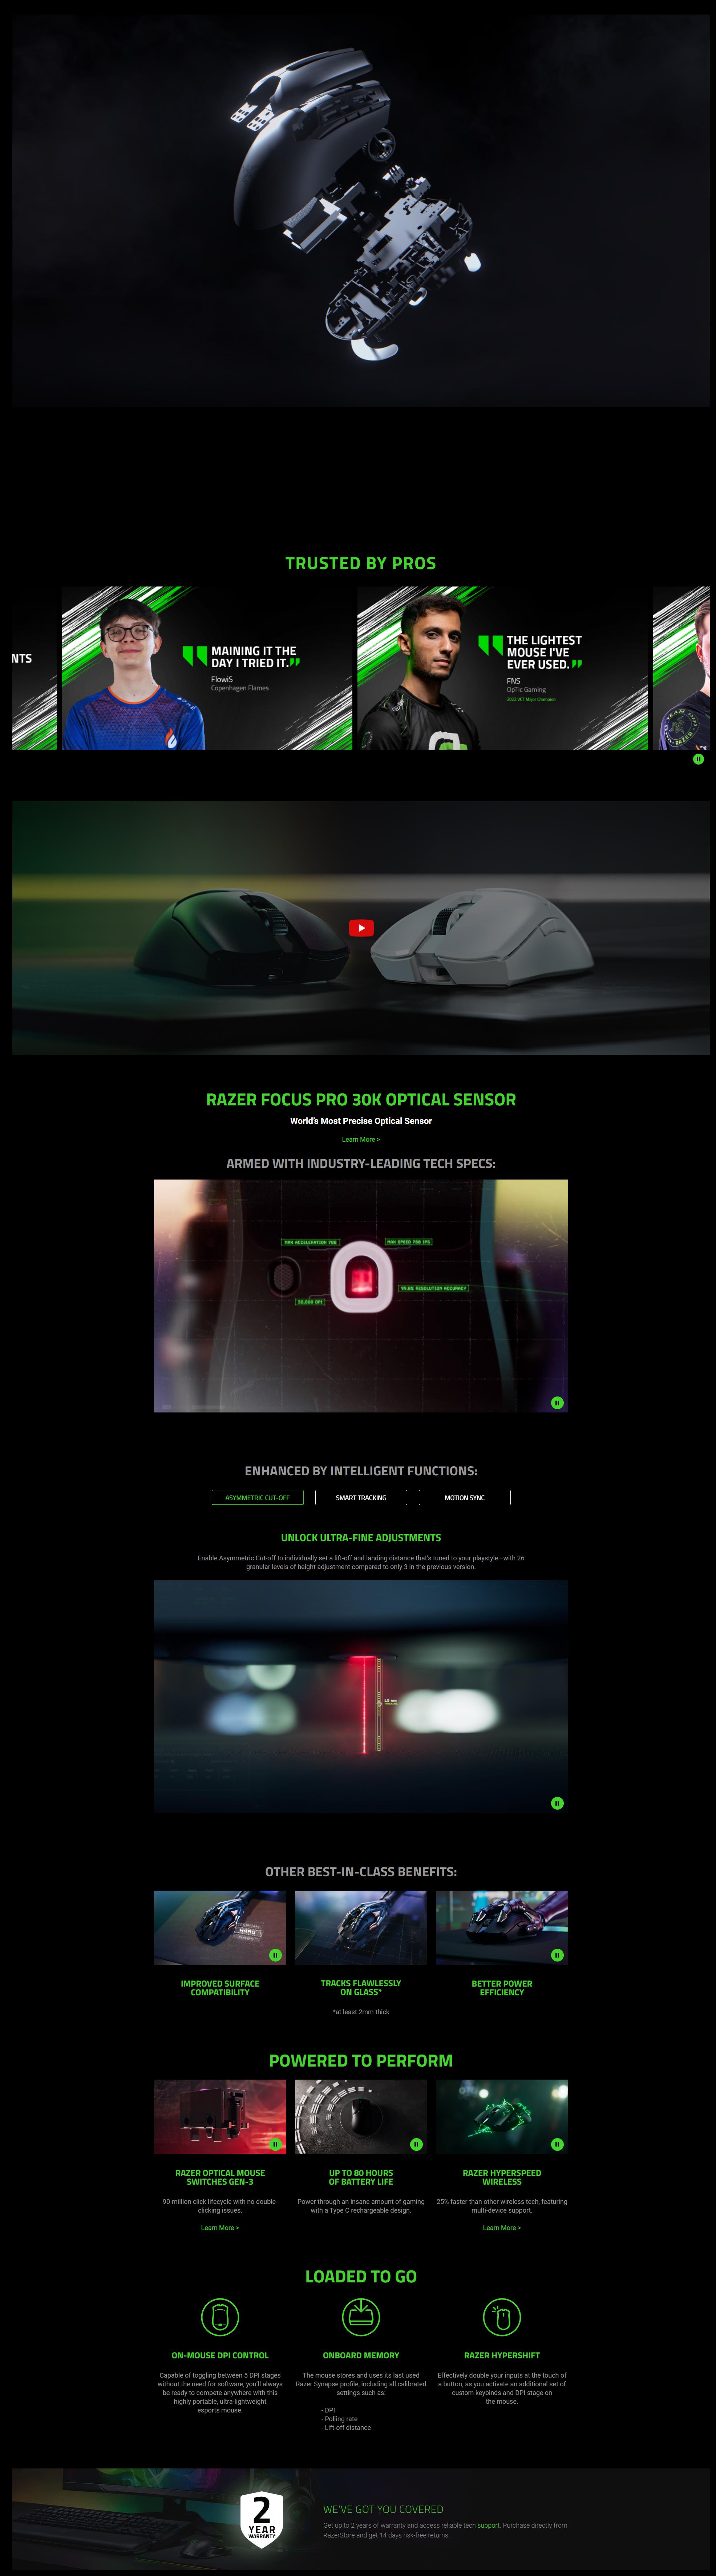 A large marketing image providing additional information about the product Razer Viper V2 Pro Wireless Gaming Mouse - Additional alt info not provided